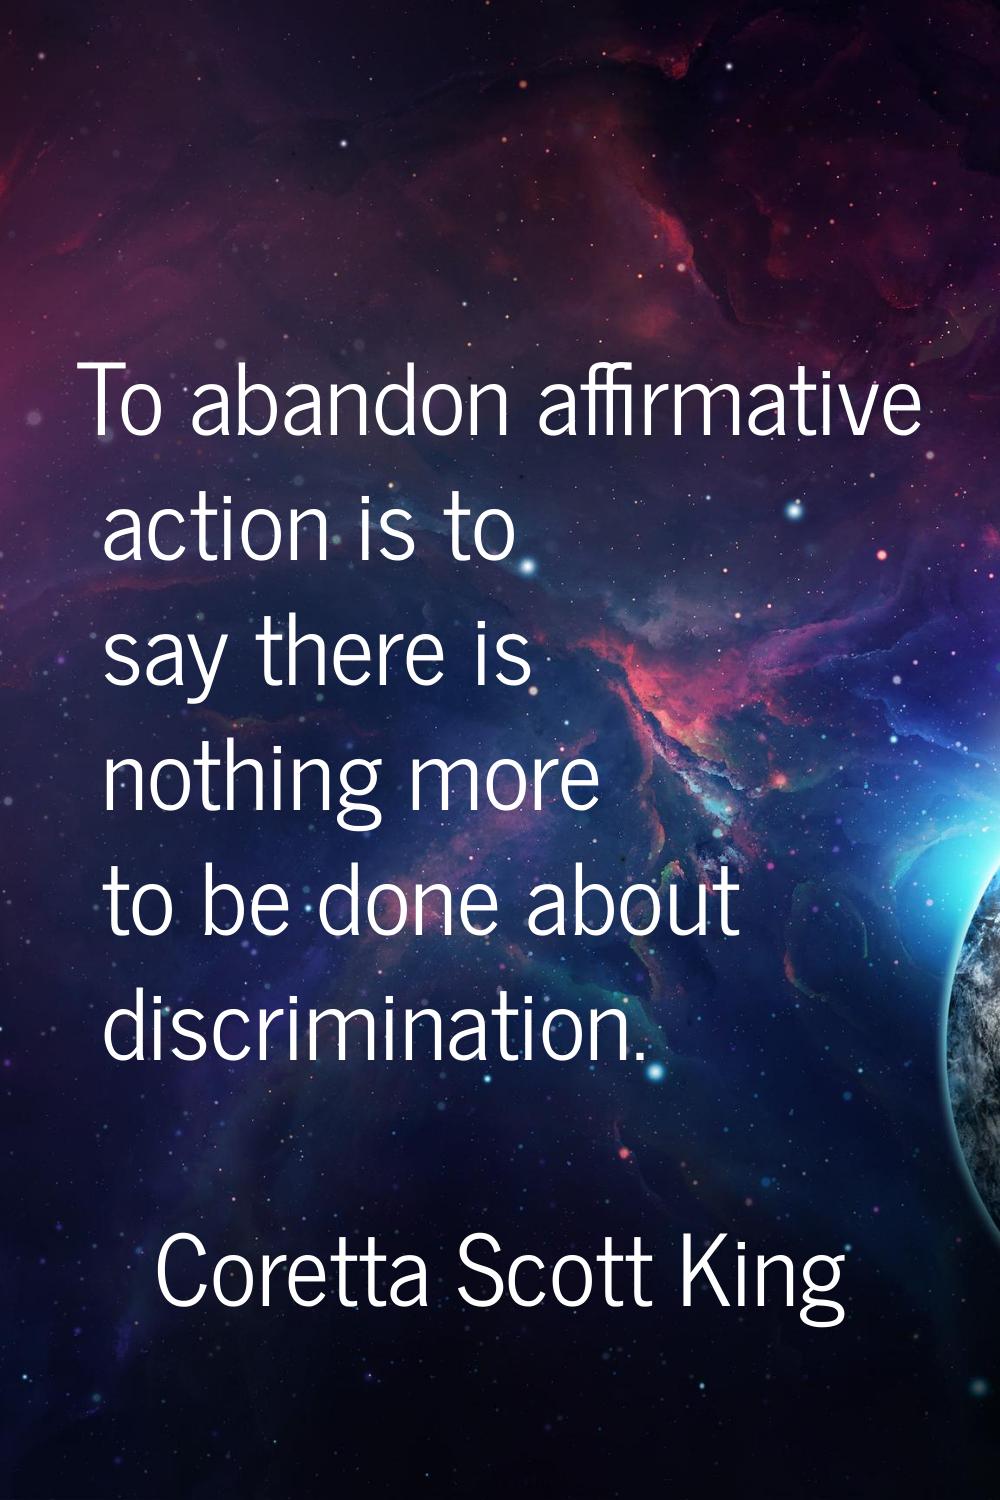 To abandon affirmative action is to say there is nothing more to be done about discrimination.